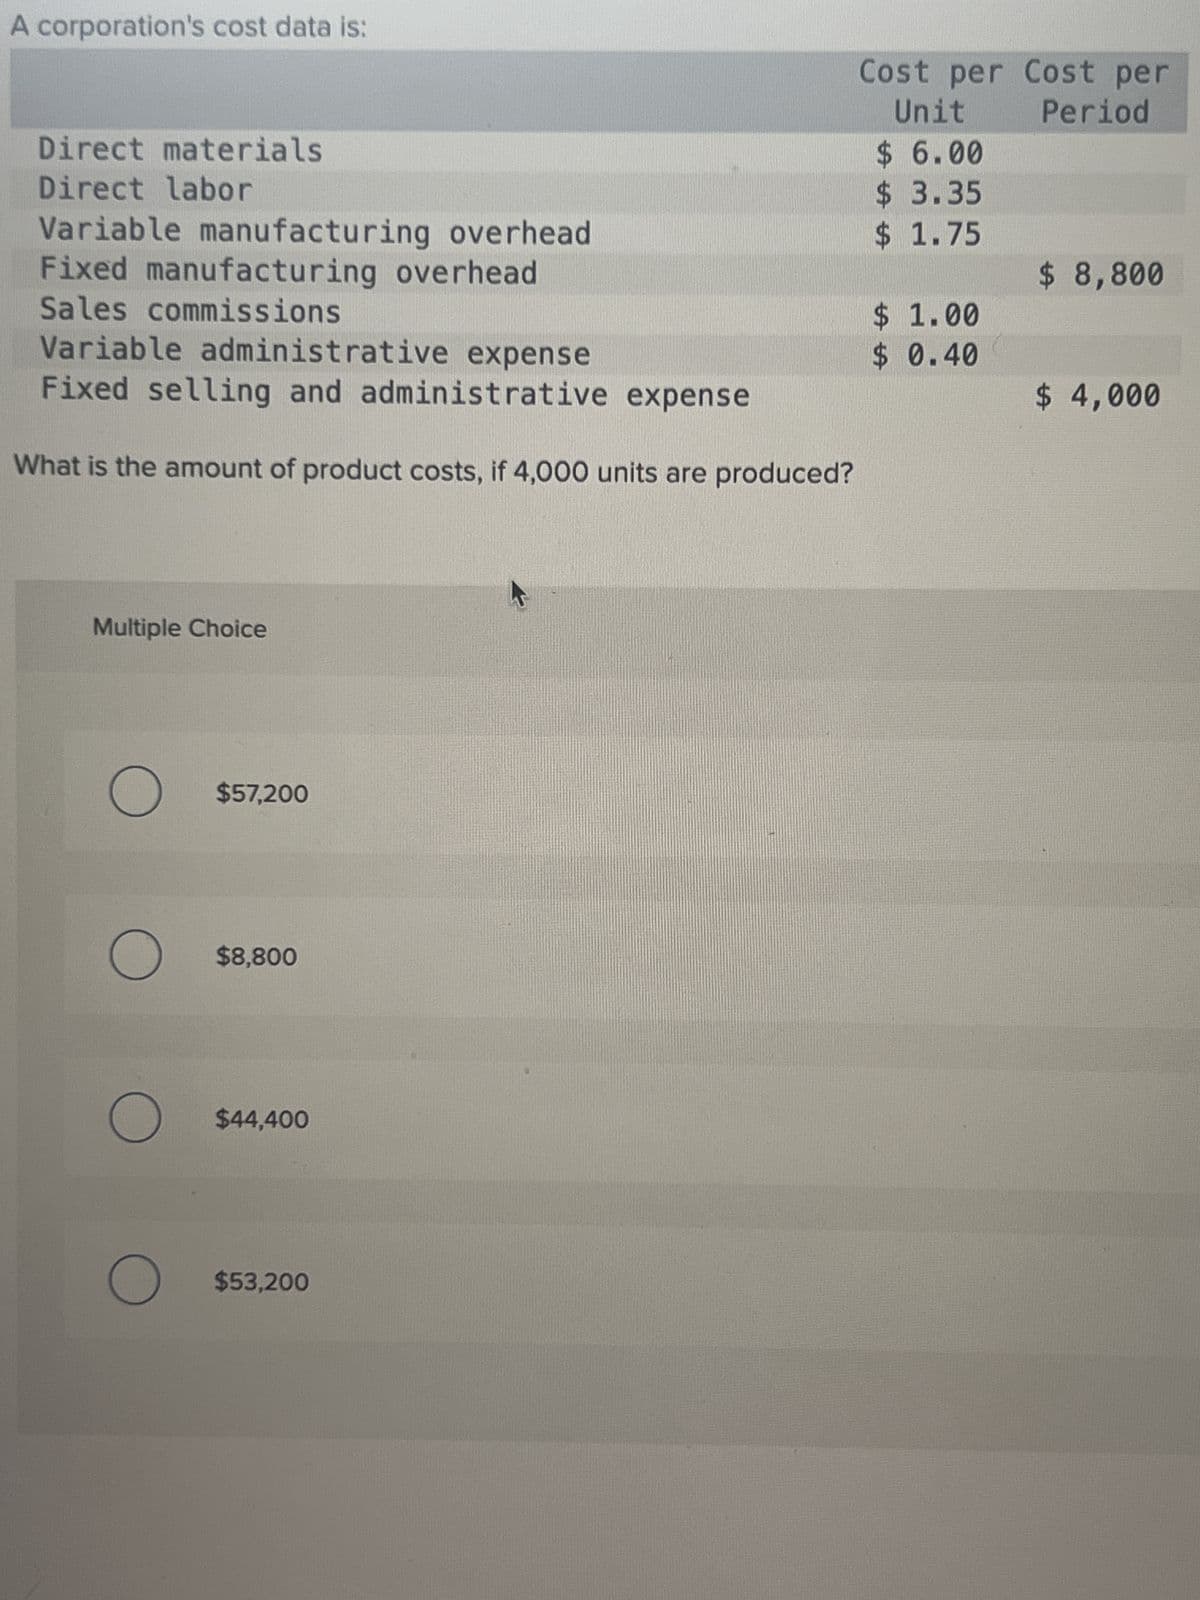 A corporation's cost data is:
Direct materials
Direct labor
Variable manufacturing overhead
Fixed manufacturing overhead
Sales commissions
Variable administrative expense
Fixed selling and administrative expense
What is the amount of product costs, if 4,000 units are produced?
Multiple Choice
O
O
O
O
$57,200
$8,800
$44,400
$53,200
Cost per Cost per
Unit Period
$ 6.00
$ 3.35
$ 1.75
$
1.00
$ 0.40
$ 8,800
$ 4,000